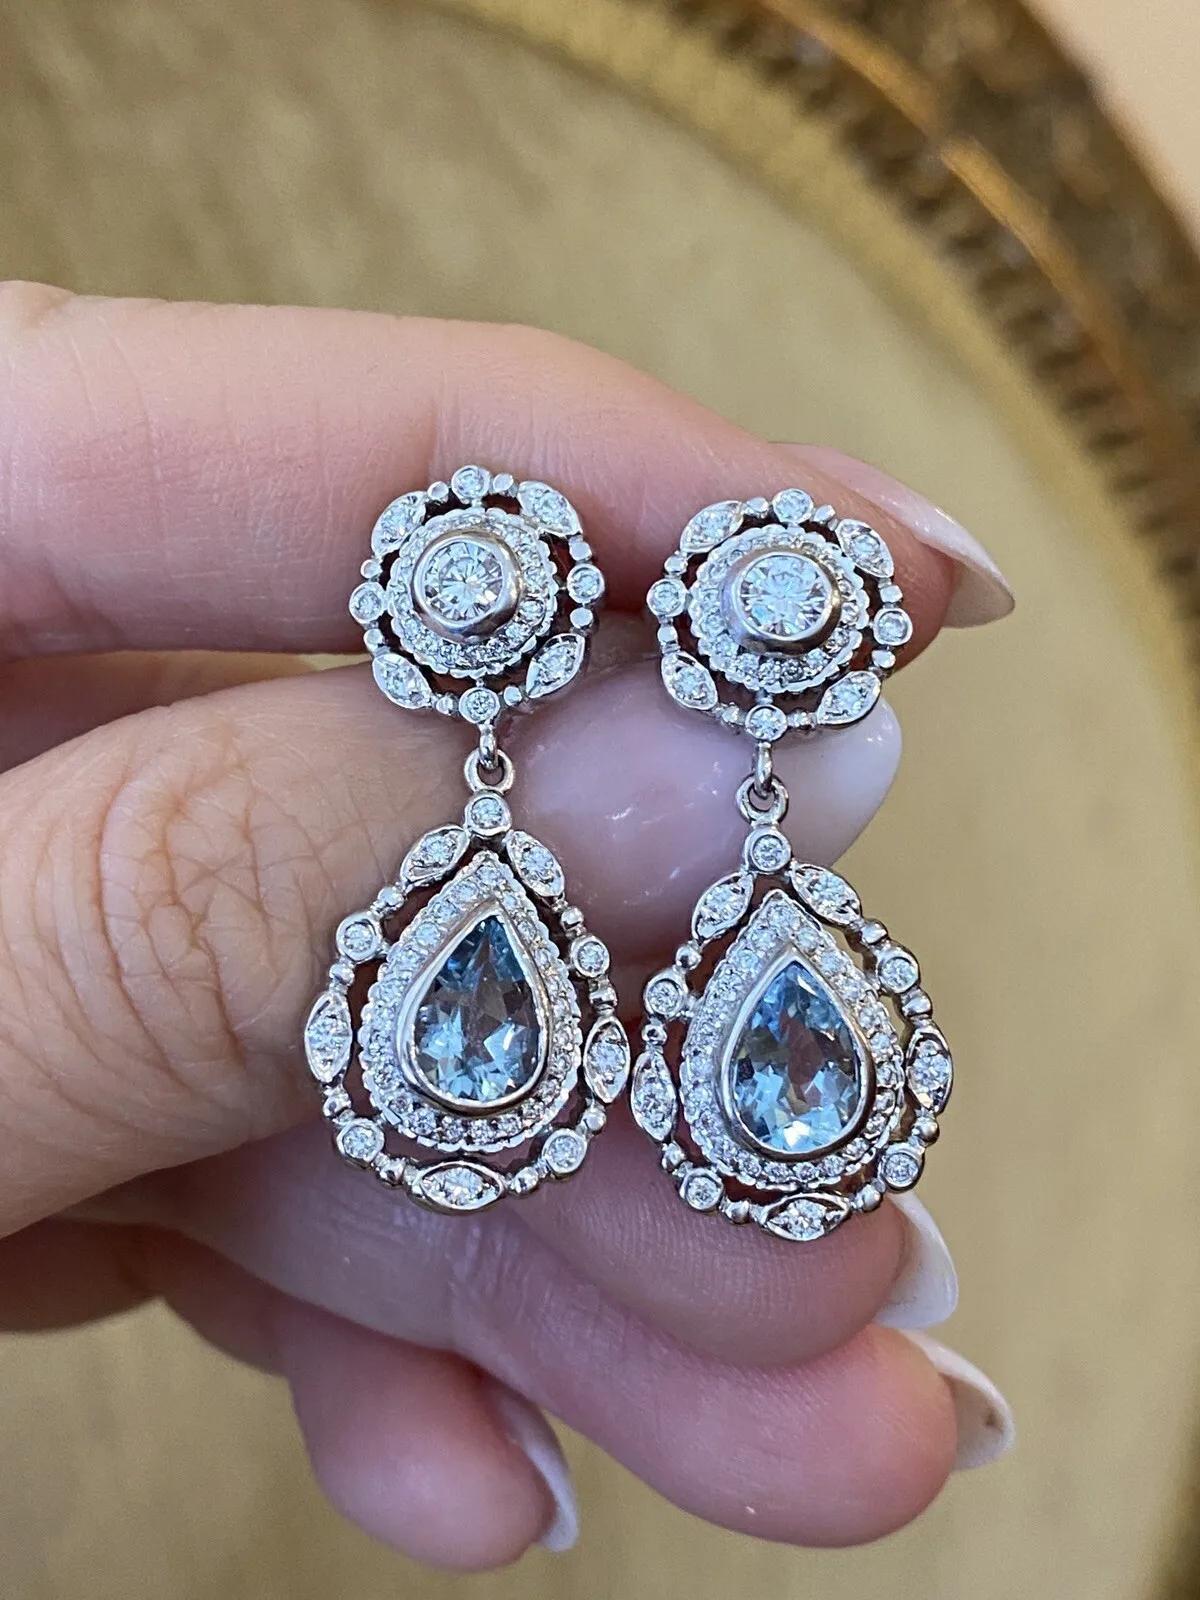 DORIS PANOS Aquamarine and Diamond Drop Earrings in 18k White Gold

Aquamarine and Diamond Drop Earrings feature a Pear shaped Aquamarine in the center accented by Round Brilliant Diamonds in 18k White Gold by Doris Panos.

Total Diamond weight is